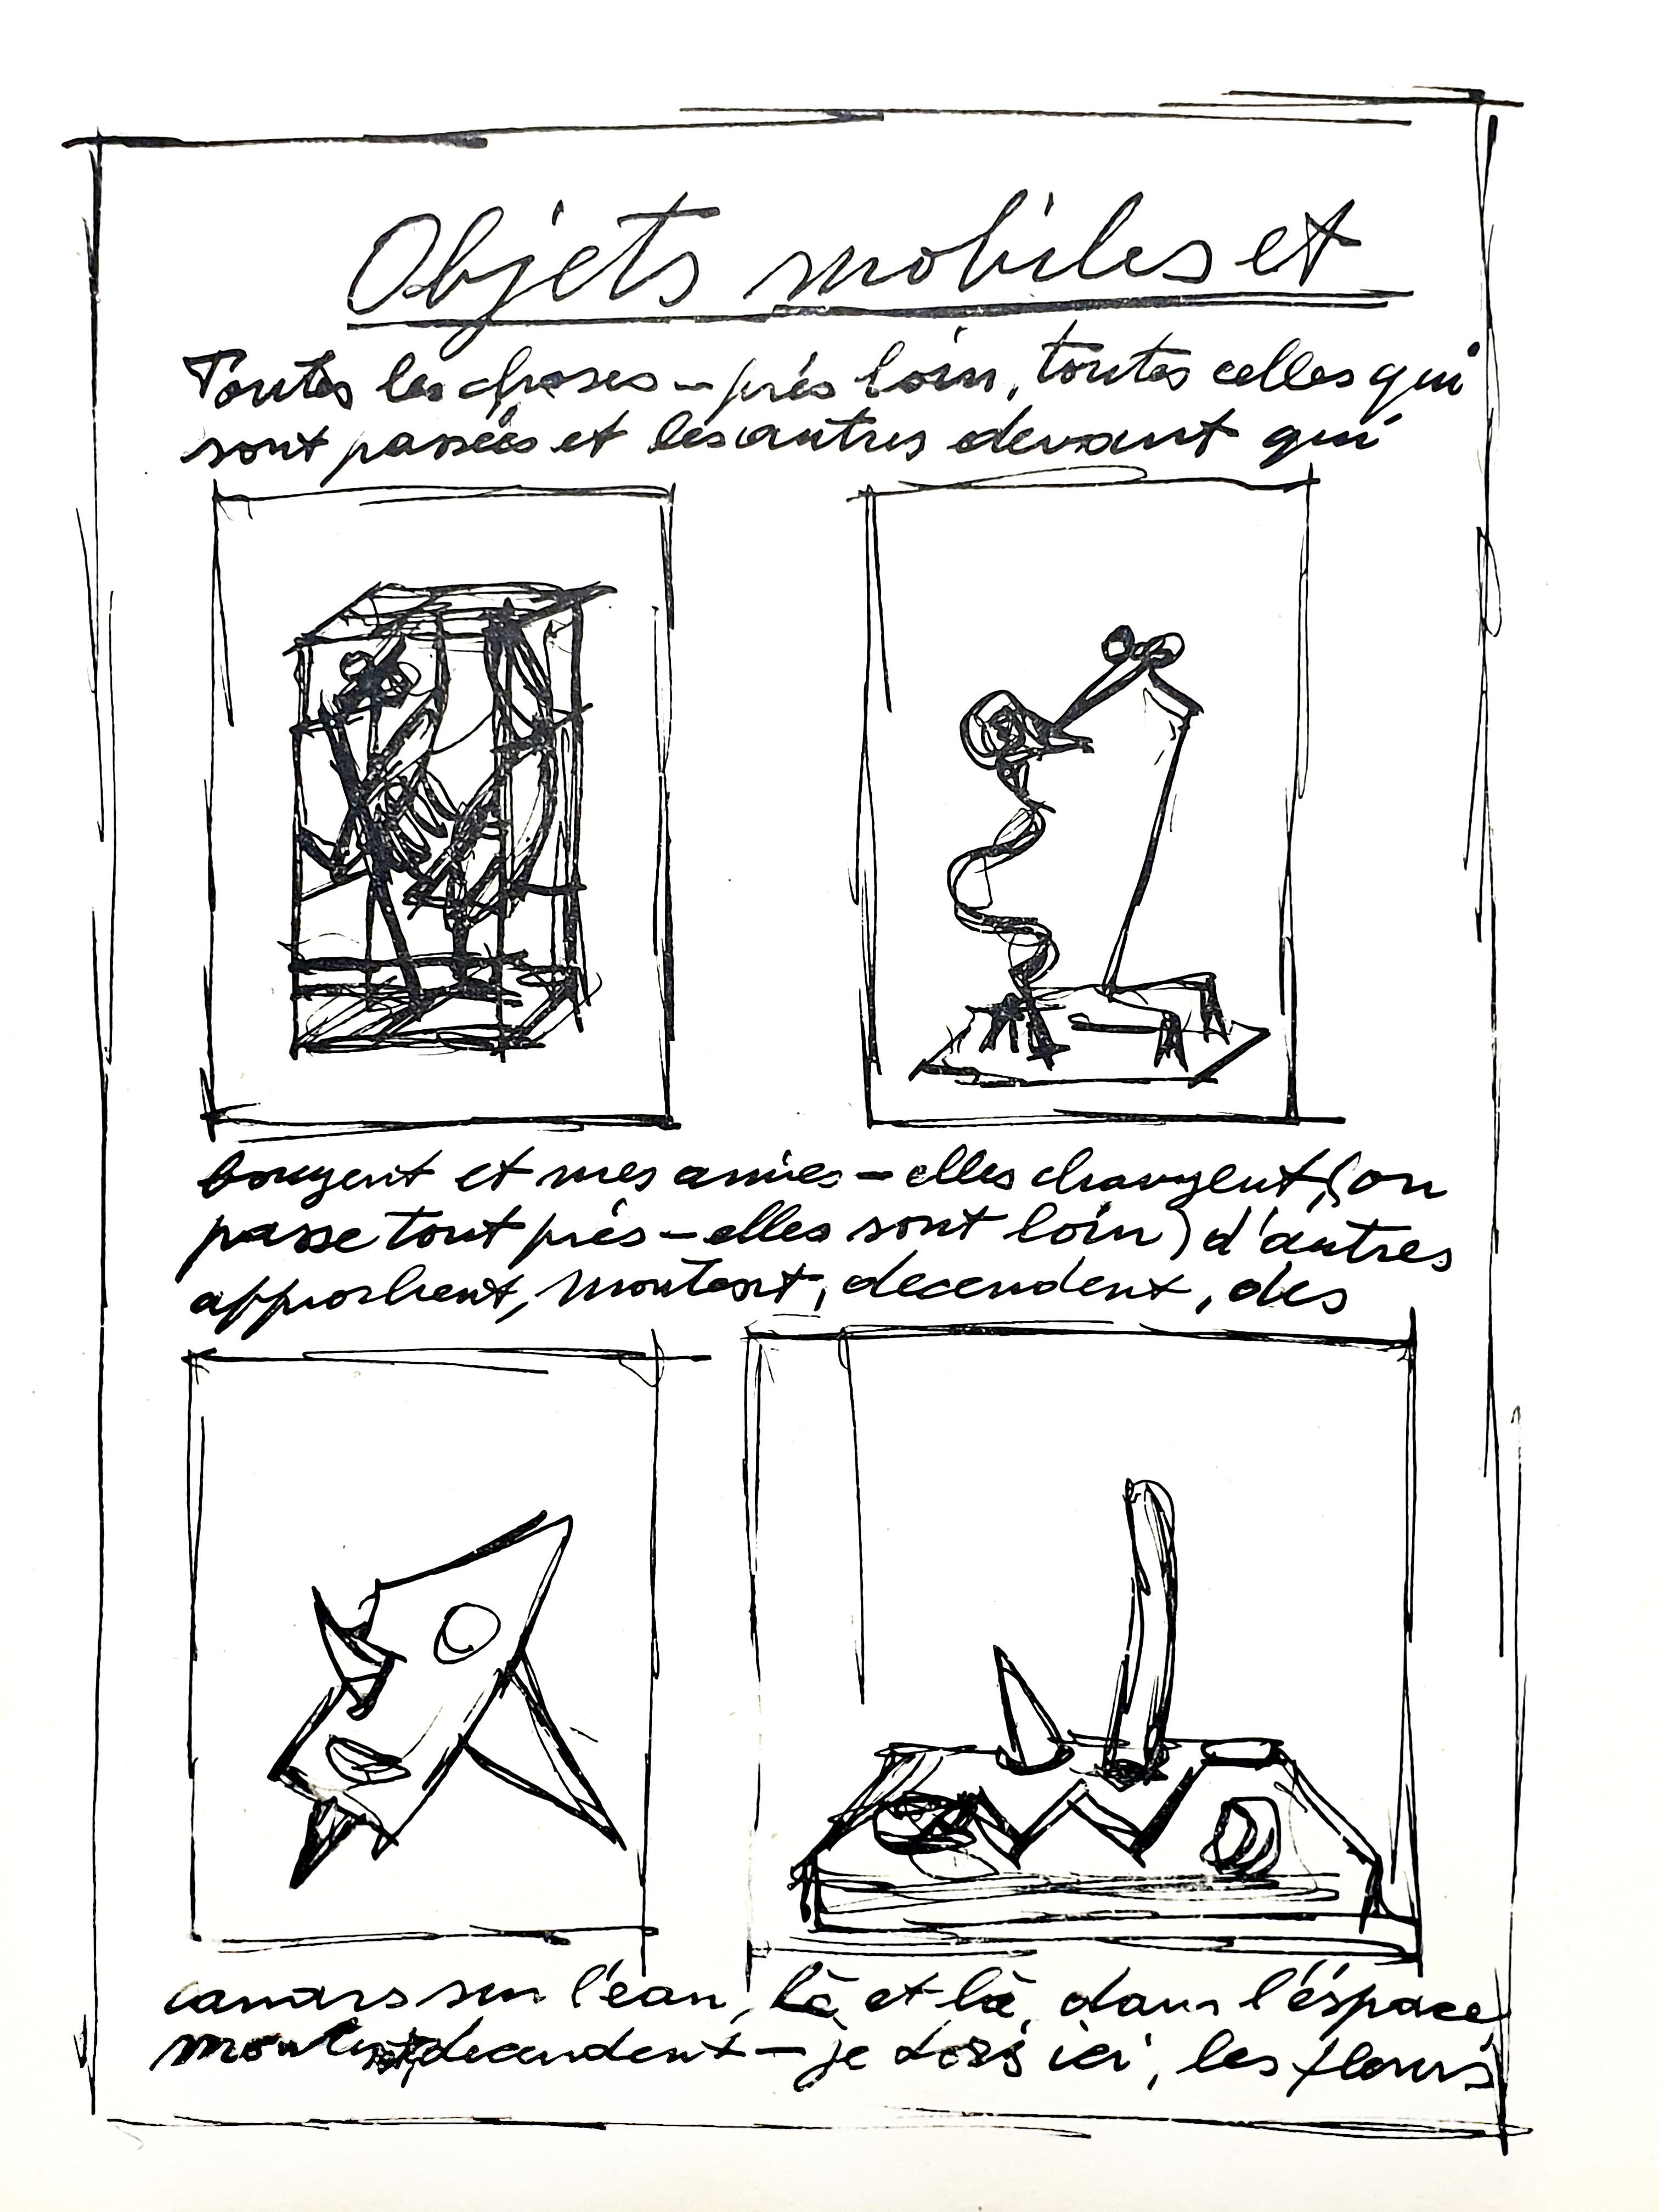 Alberto Giacometti Original Lithograph
Published in the deluxe art review, XXe Siecle
1952
Dimensions: 32 x 24 cm 
Publisher: G. di San Lazzaro.
Unsigned and unumbered as issued